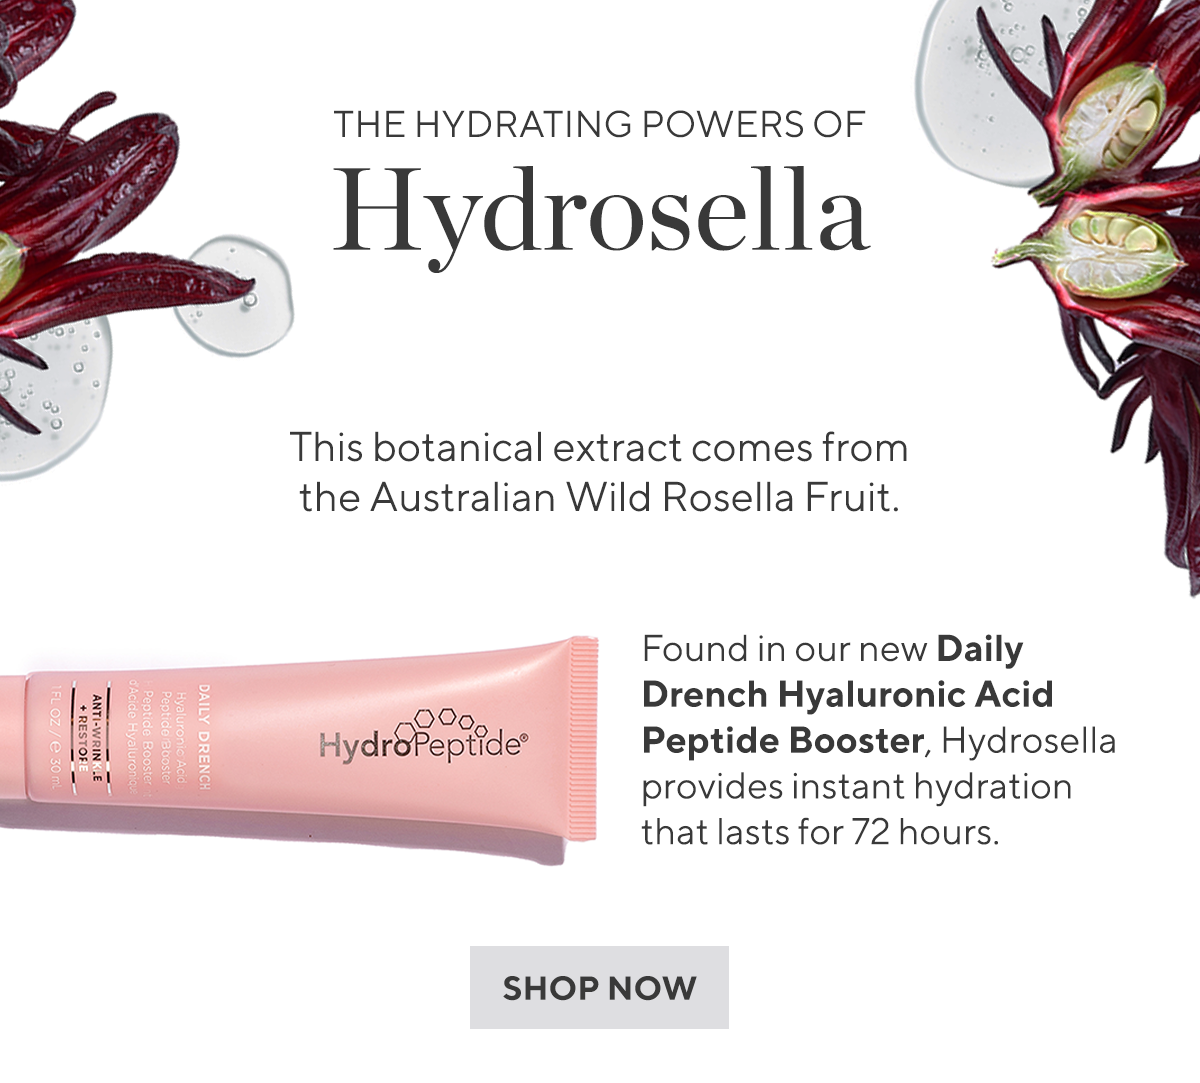 Hydrosella provides instant hydration that lasts for 72 hours. Find it in or new hyaluronic acid serum Daily Drench